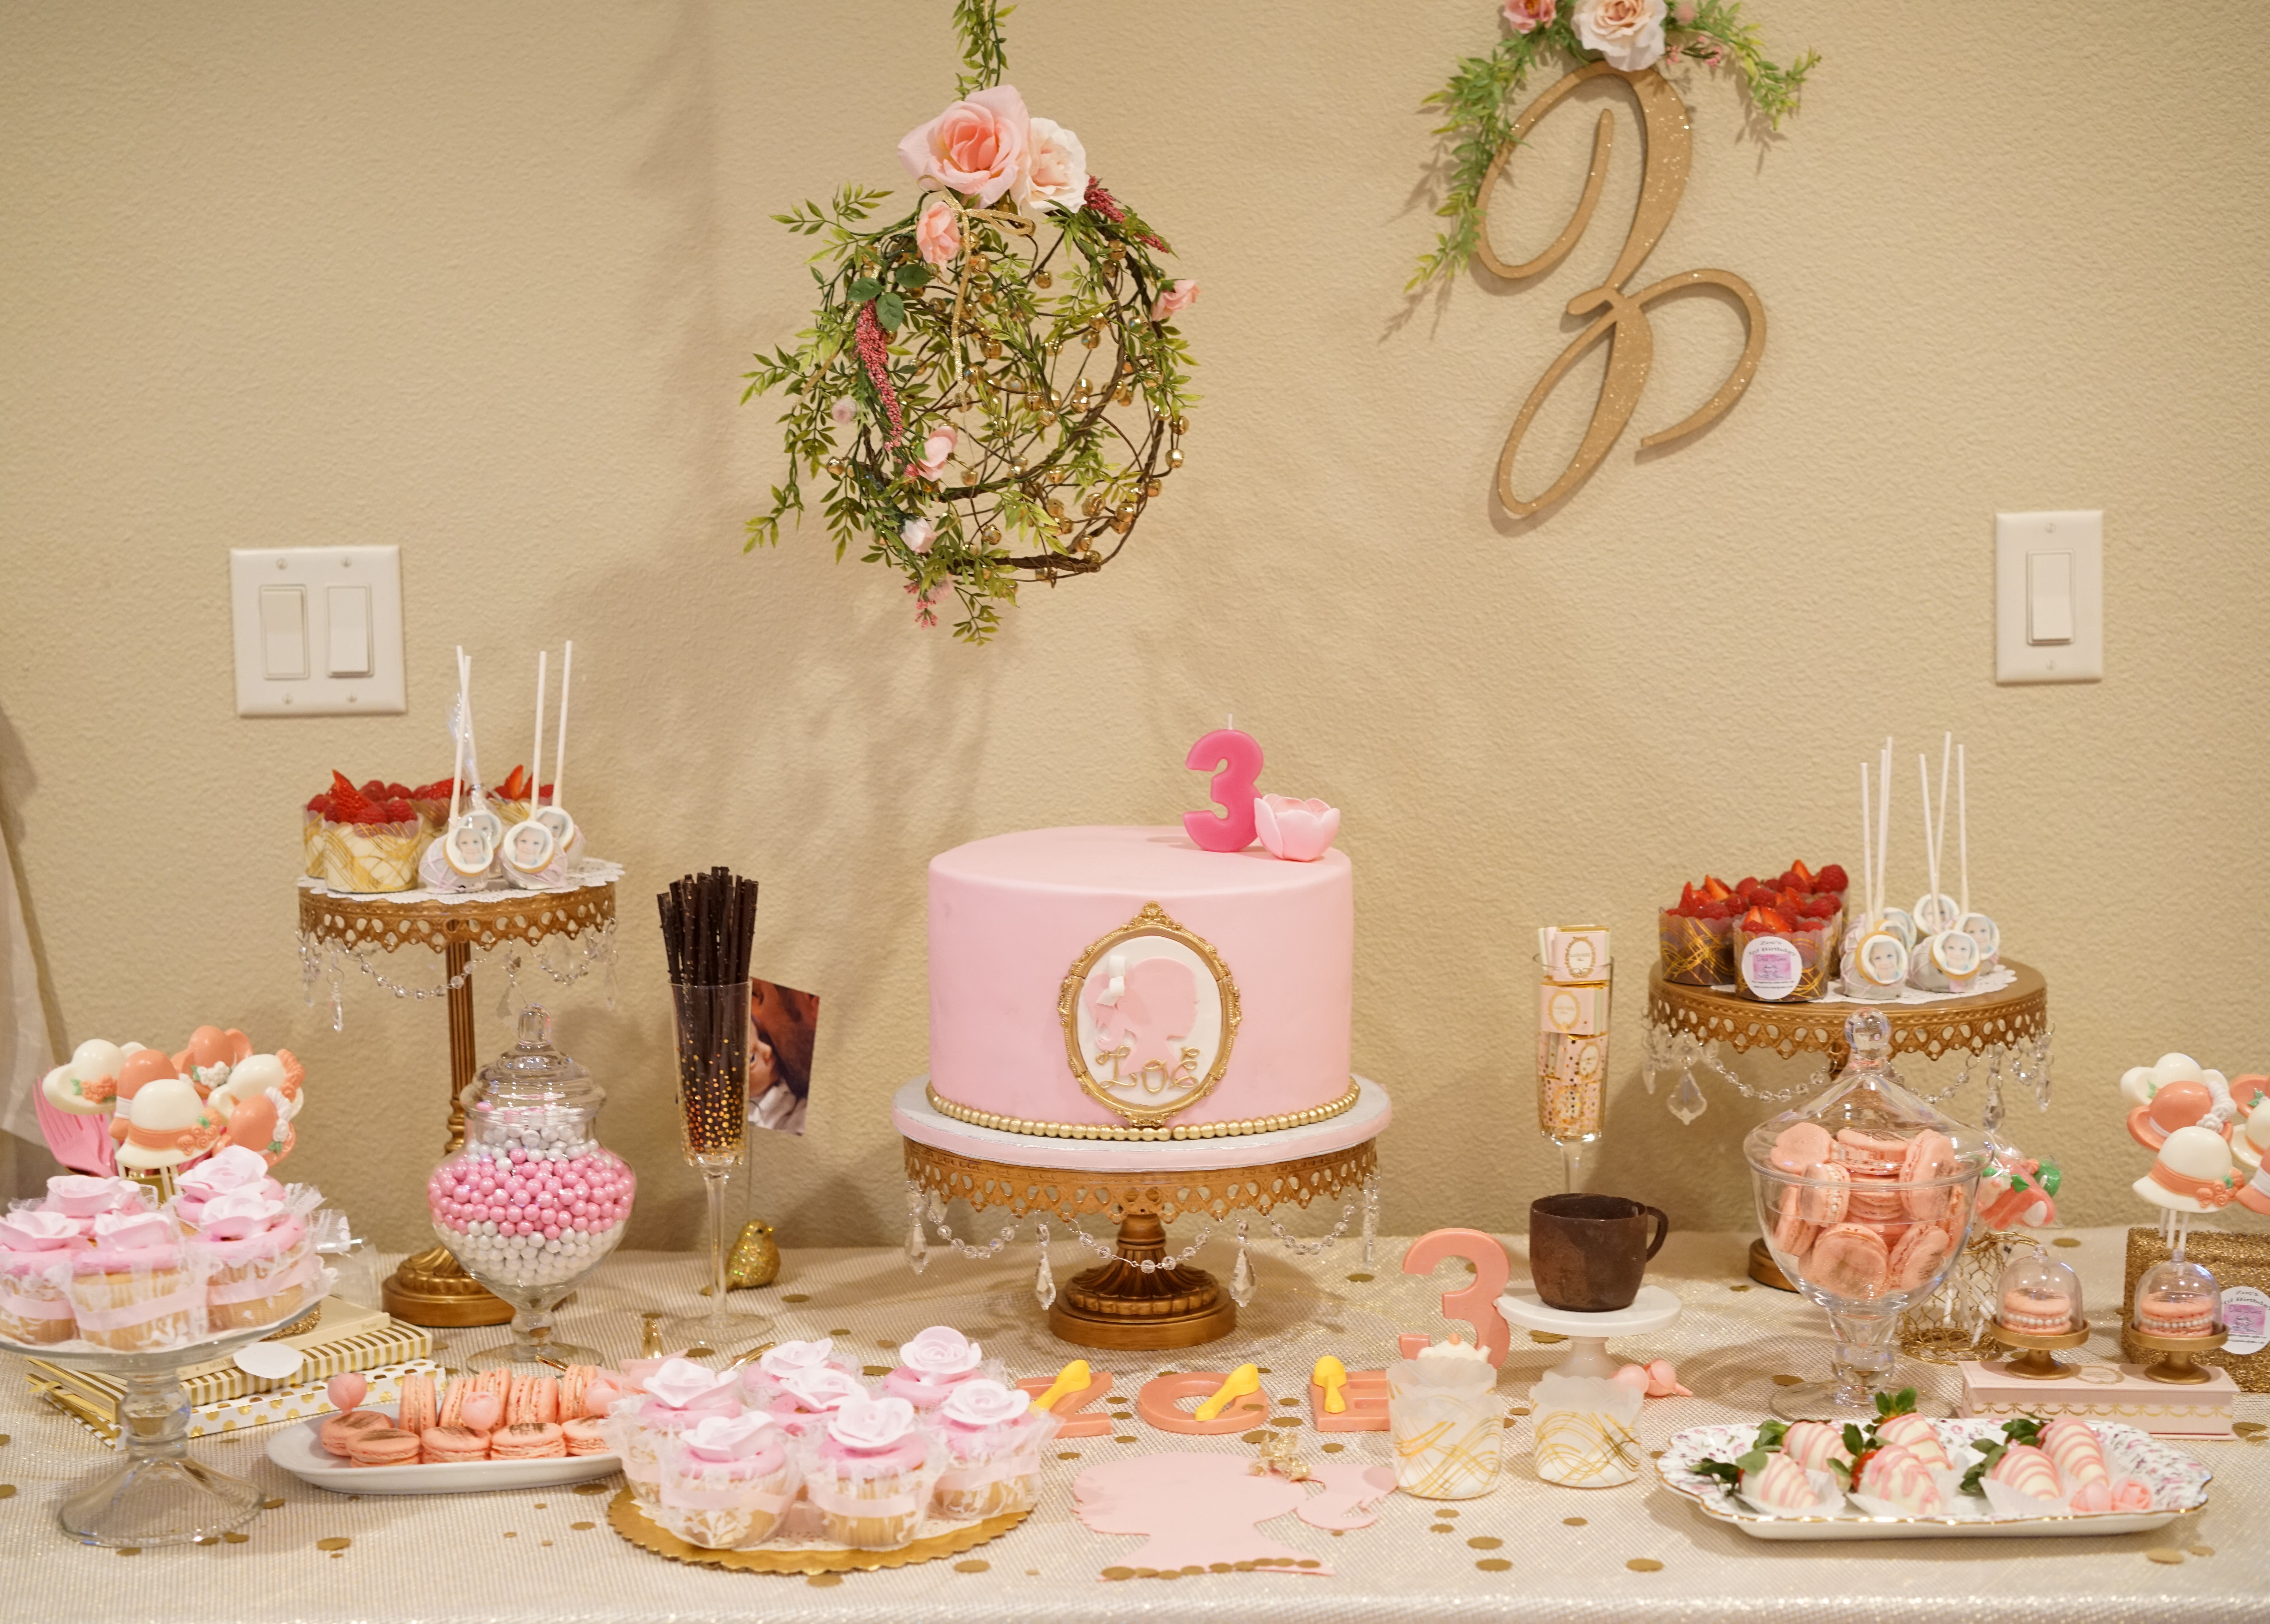 6-simple-steps-for-hosting-a-tea-party-birthday-for-kids-the-cuteness